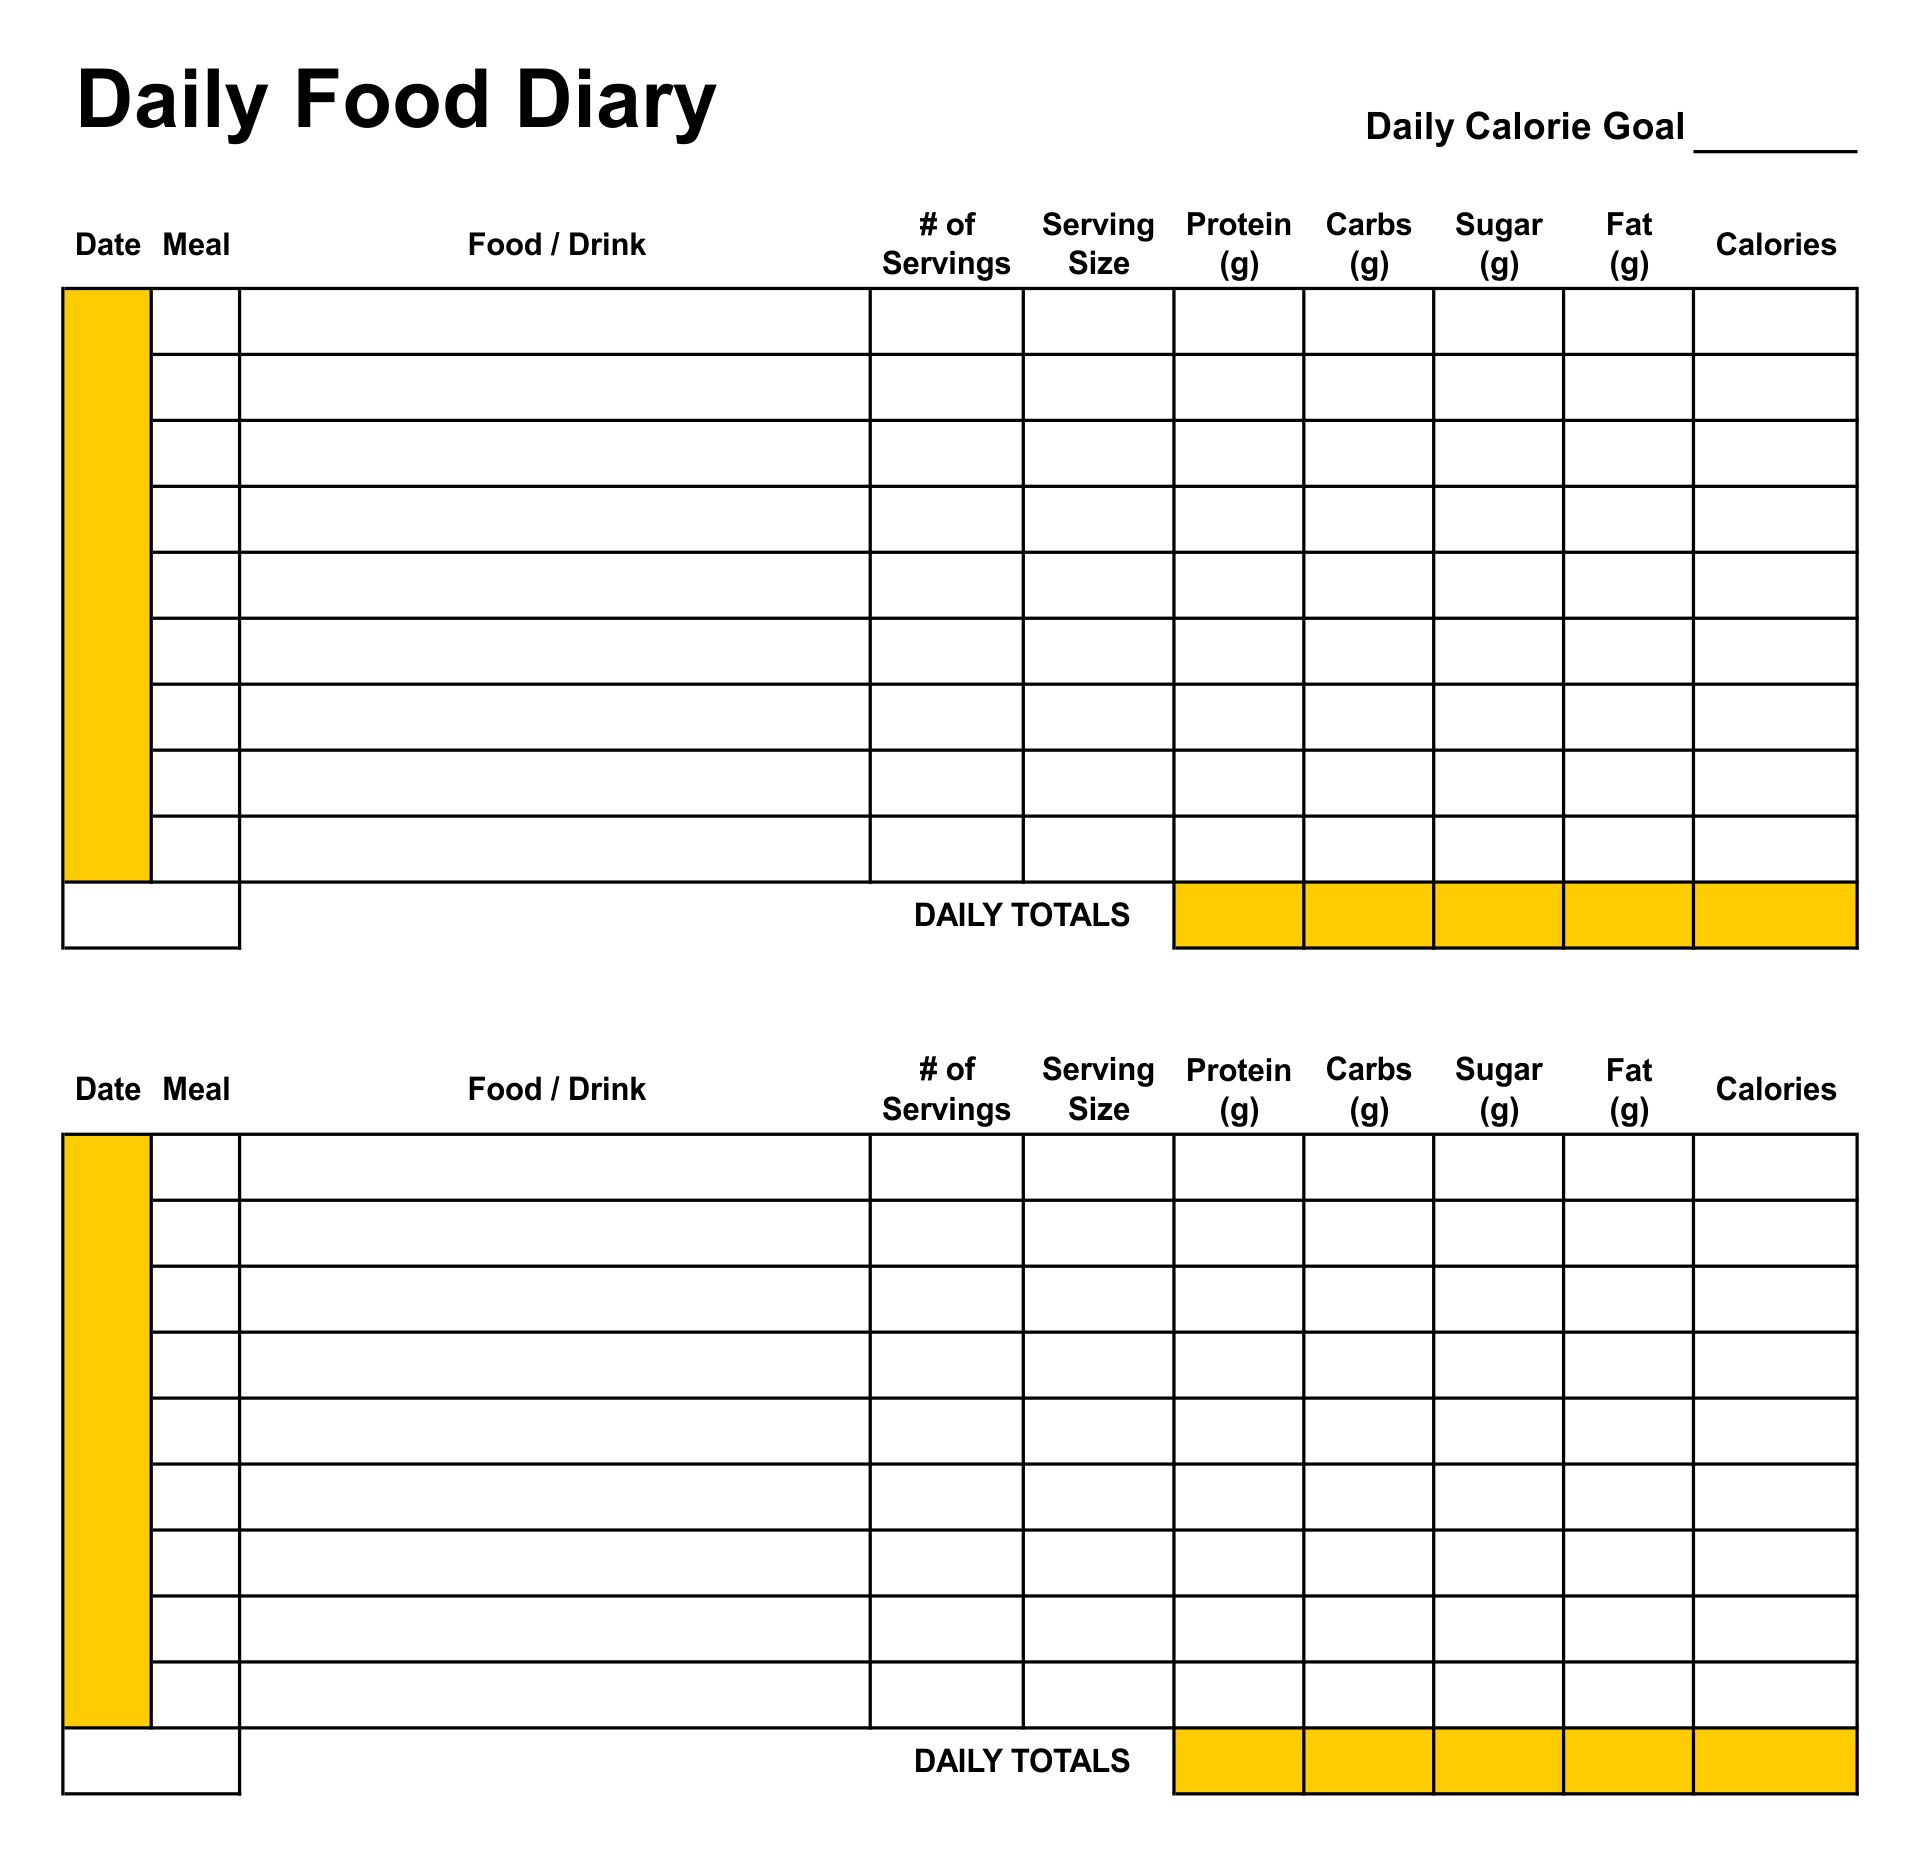 7-best-images-of-daily-diet-journal-printable-printable-daily-food